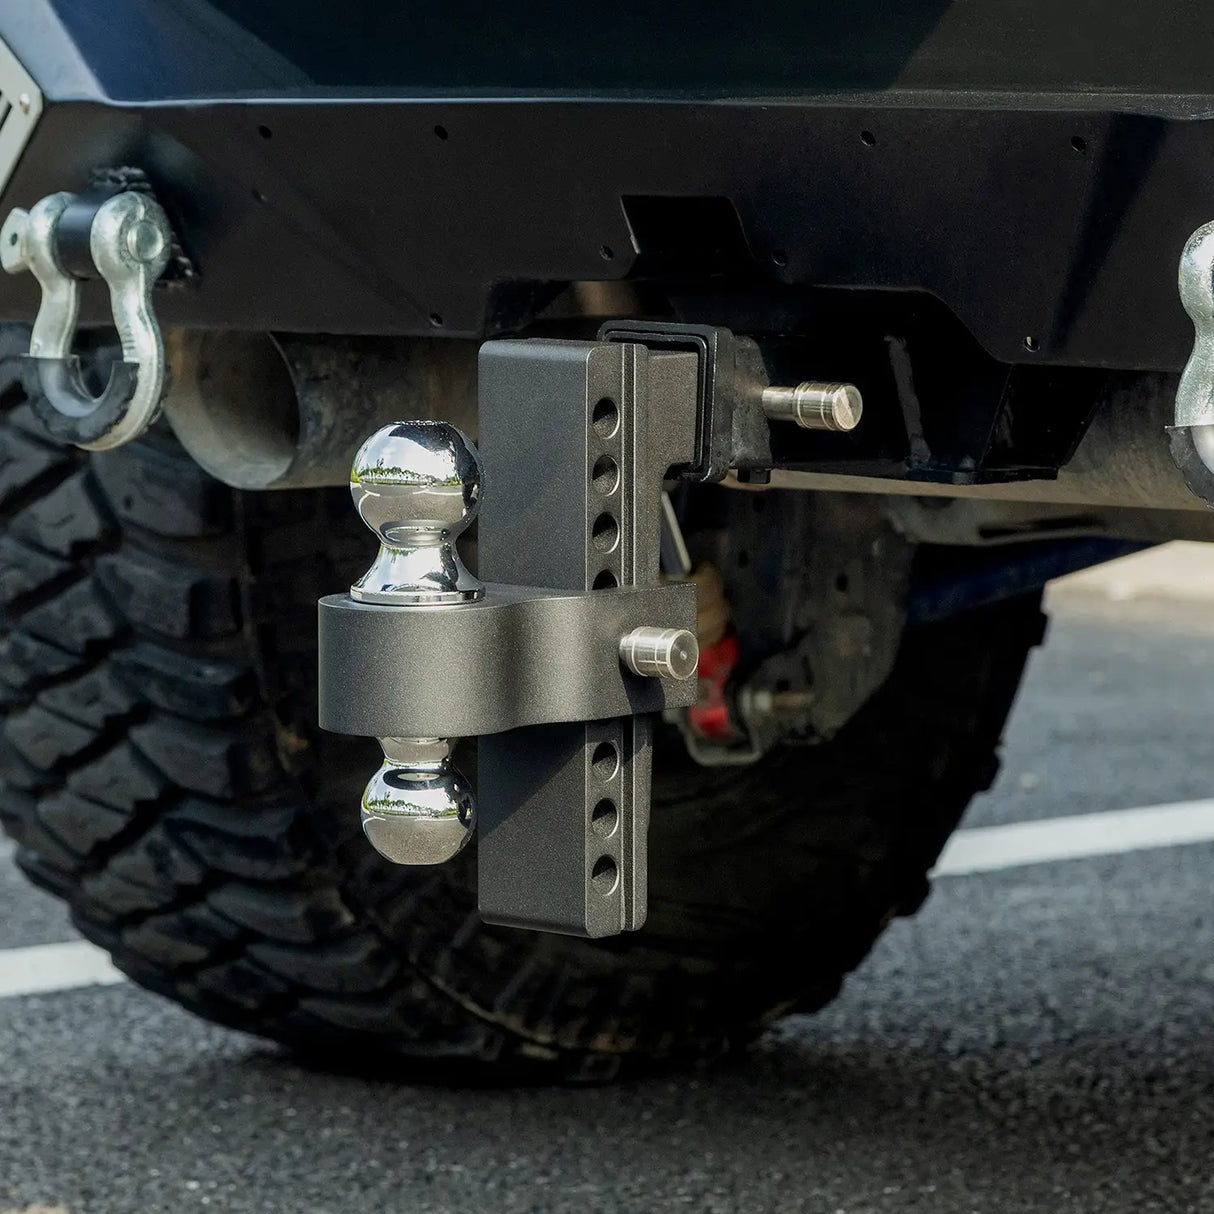 Adjustable Trailer Hitch, Fits 2-Inch Receiver, 8-Inch Drop Hitch, Aluminum Tow Hitch, Ball Mount, 2 and 2-5/16 inch Combo Stainless Steel Tow Balls with Double Key Locks, Black